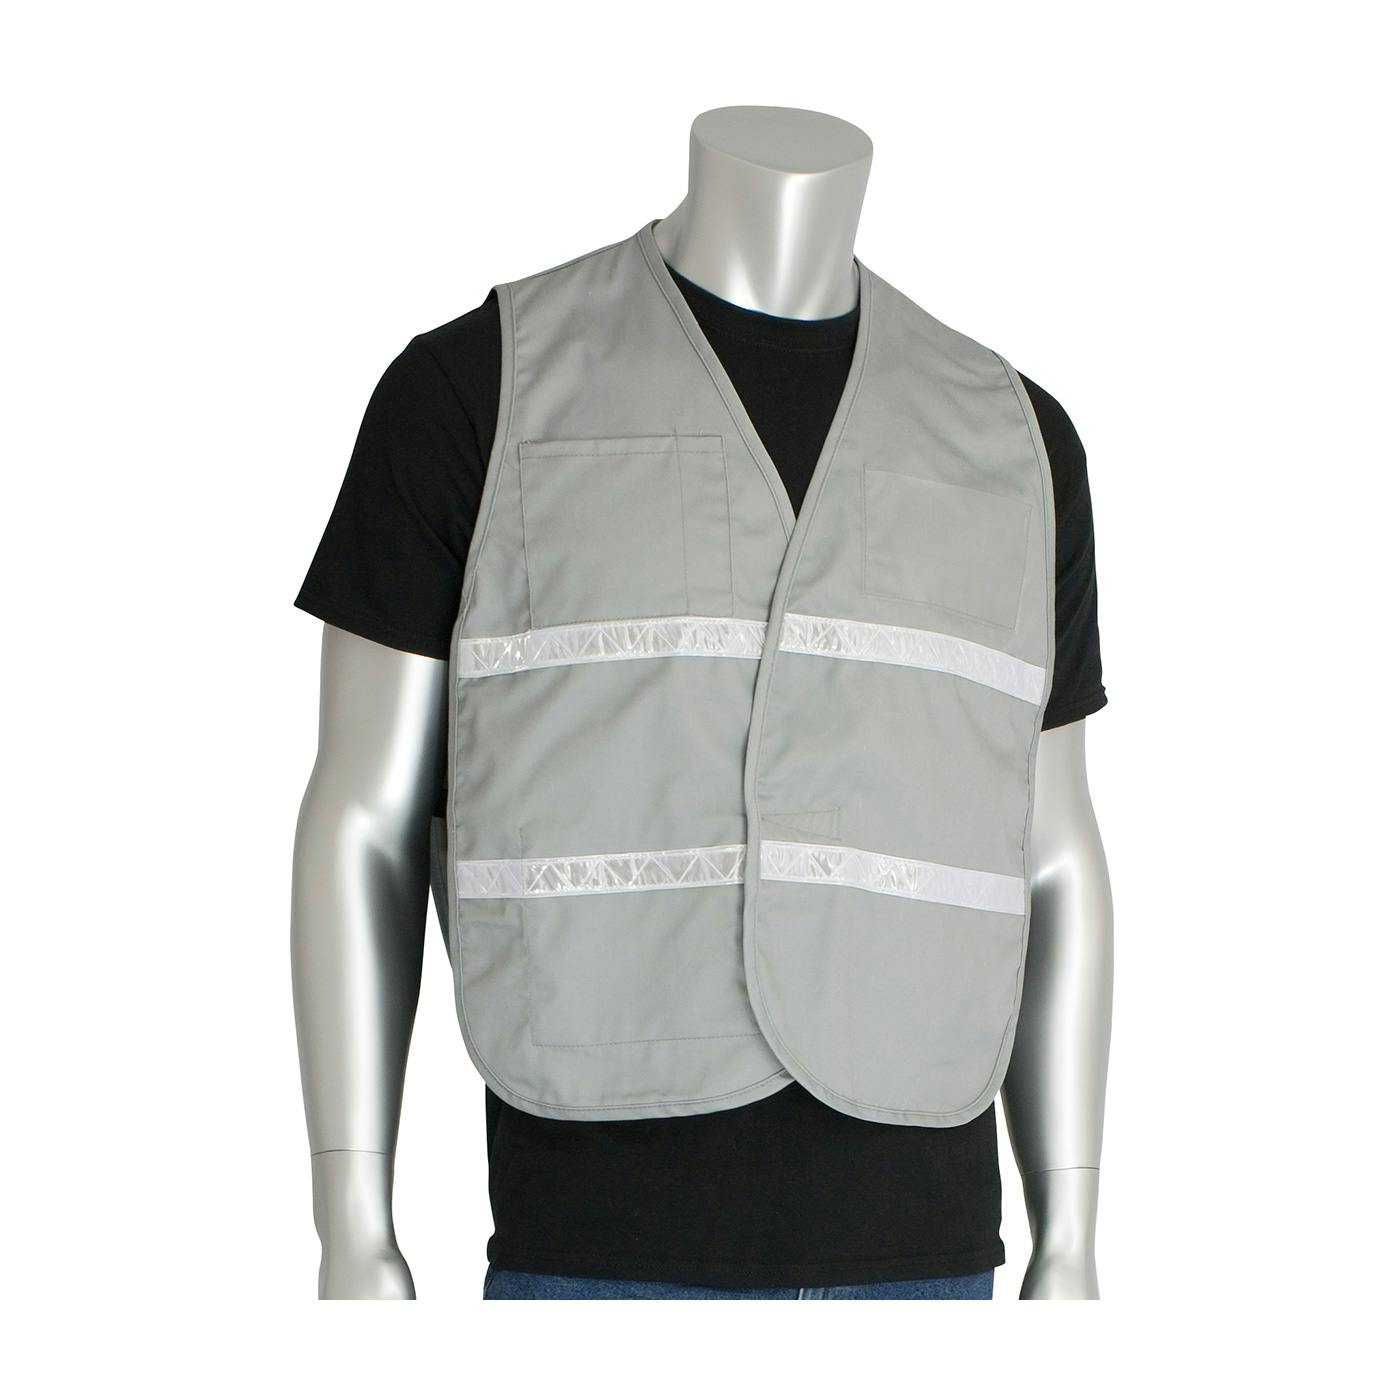 Non-ANSI Incident Command Vest - Cotton/Polyester Blend, Gray (300-2515)_1